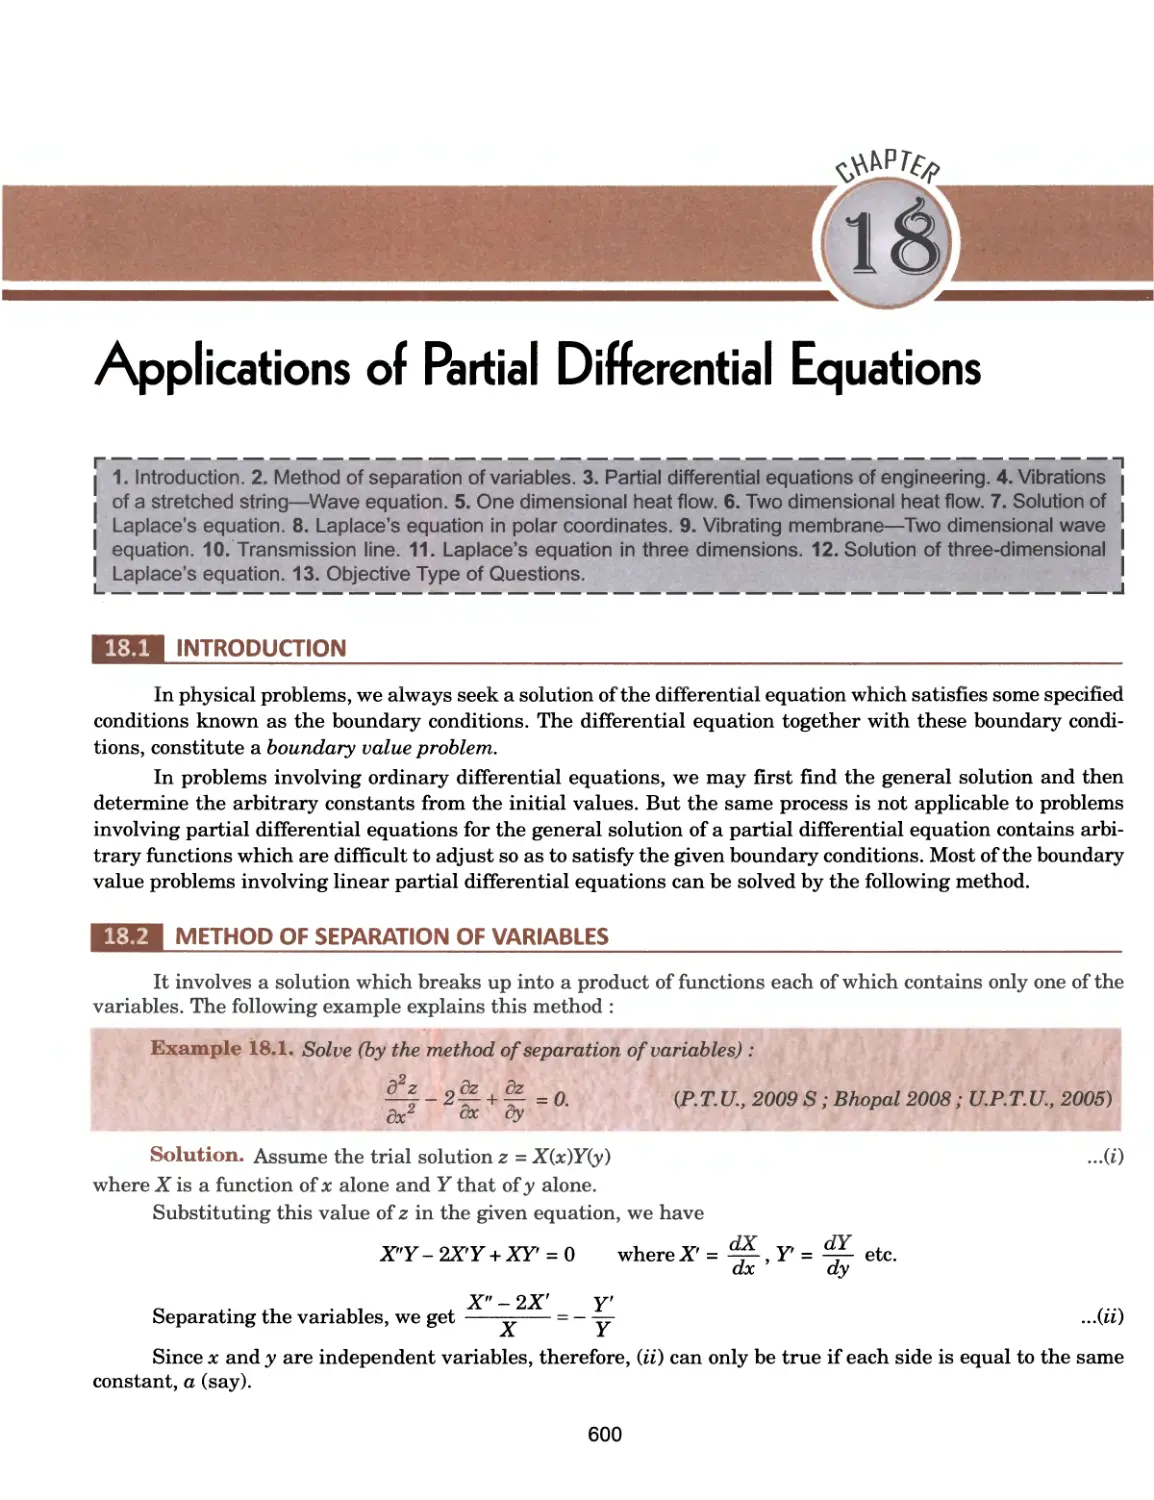 18.Applications of Partial Differential Equations 600